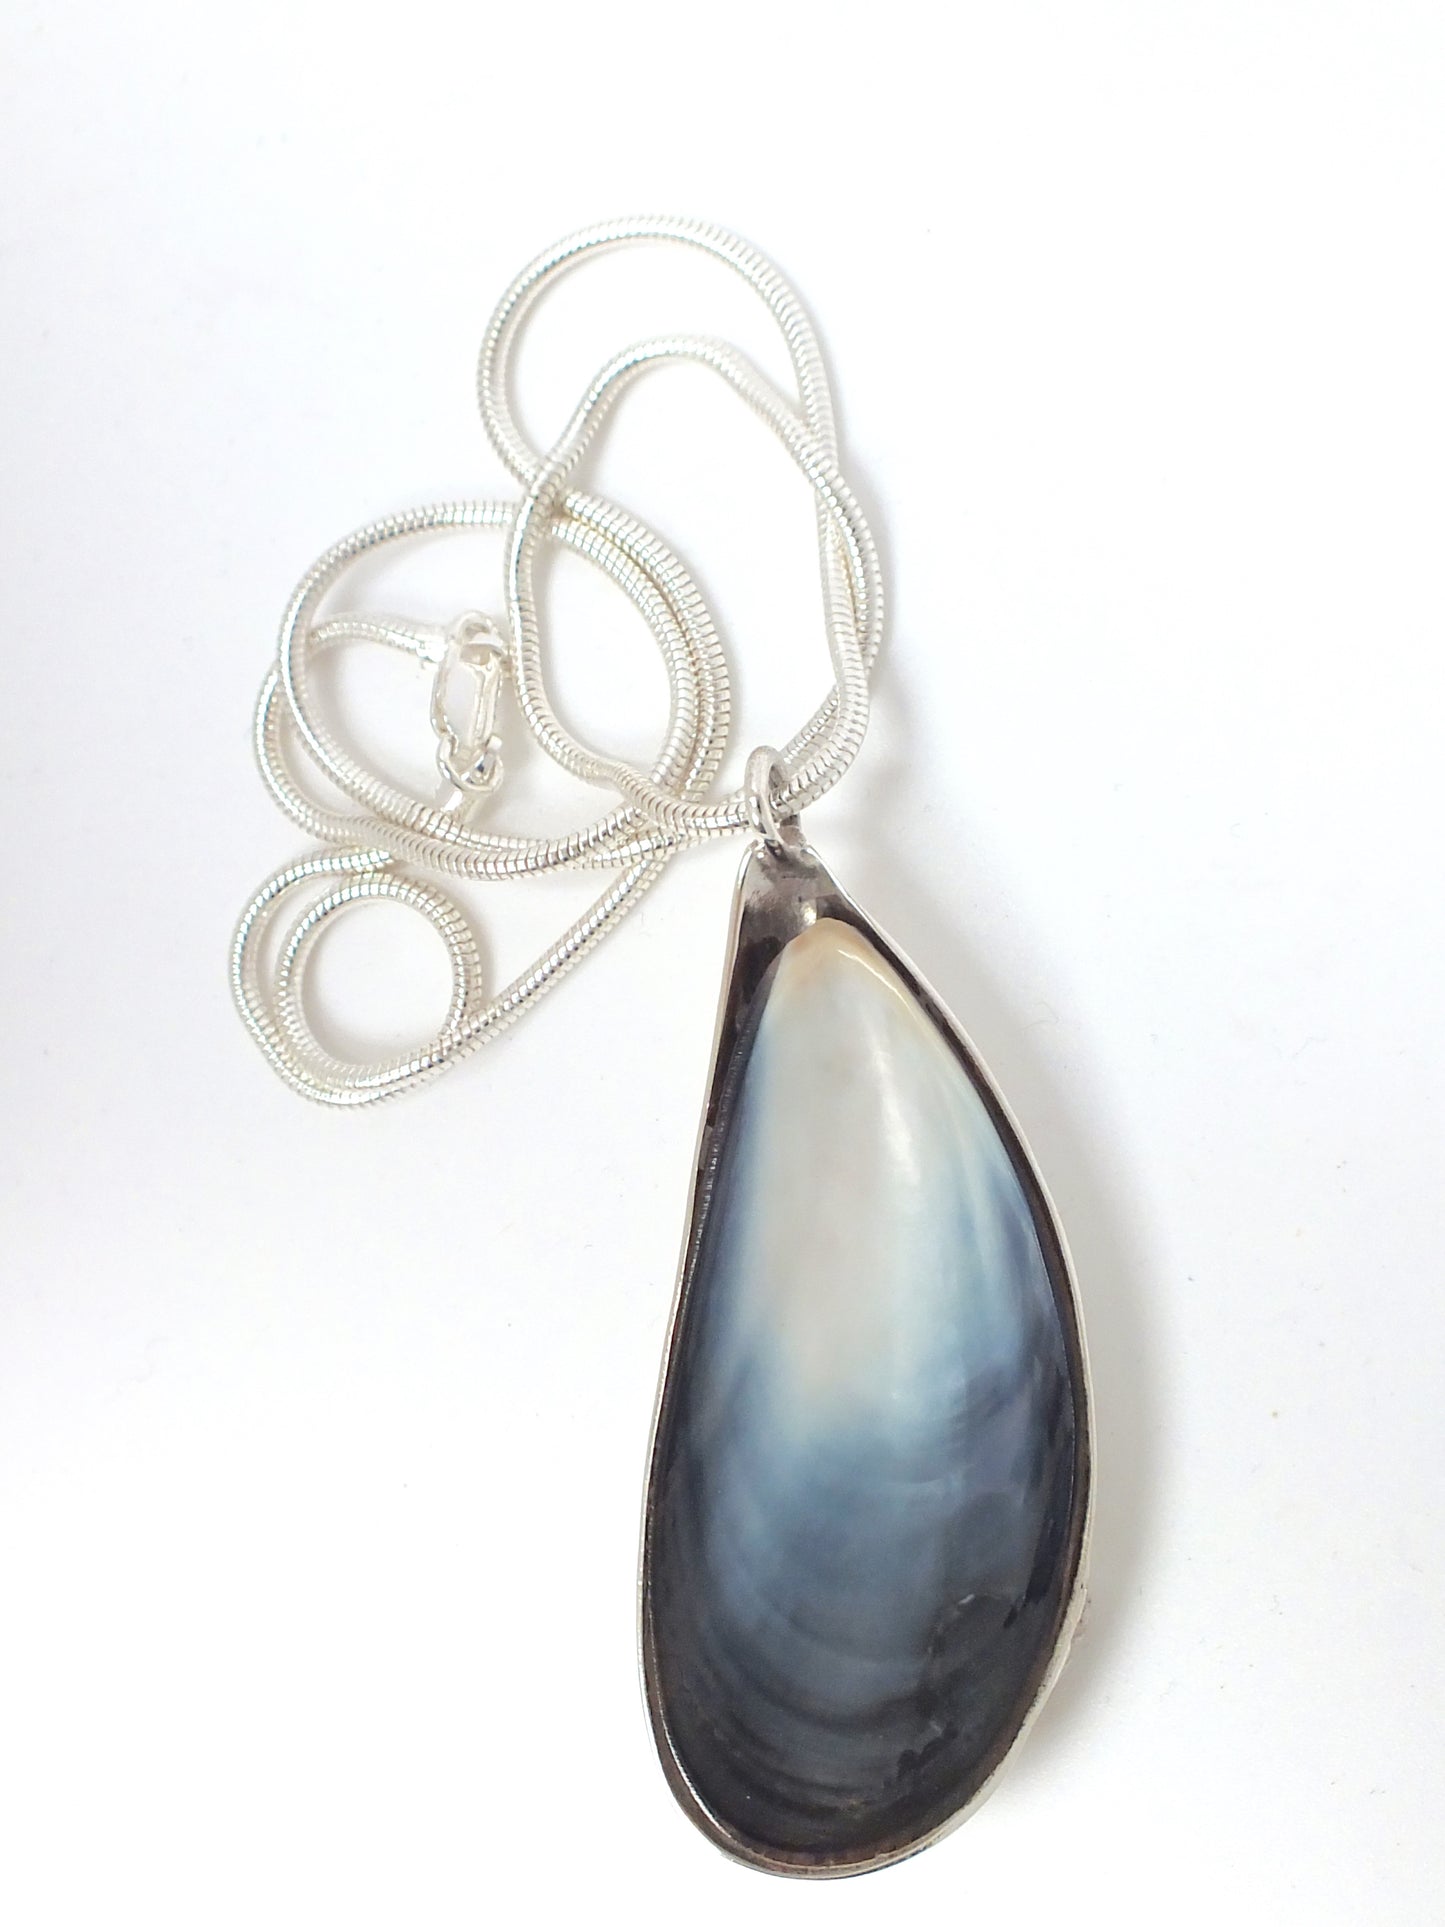 Solid silver real mussel necklace by Pa-pa jewellery